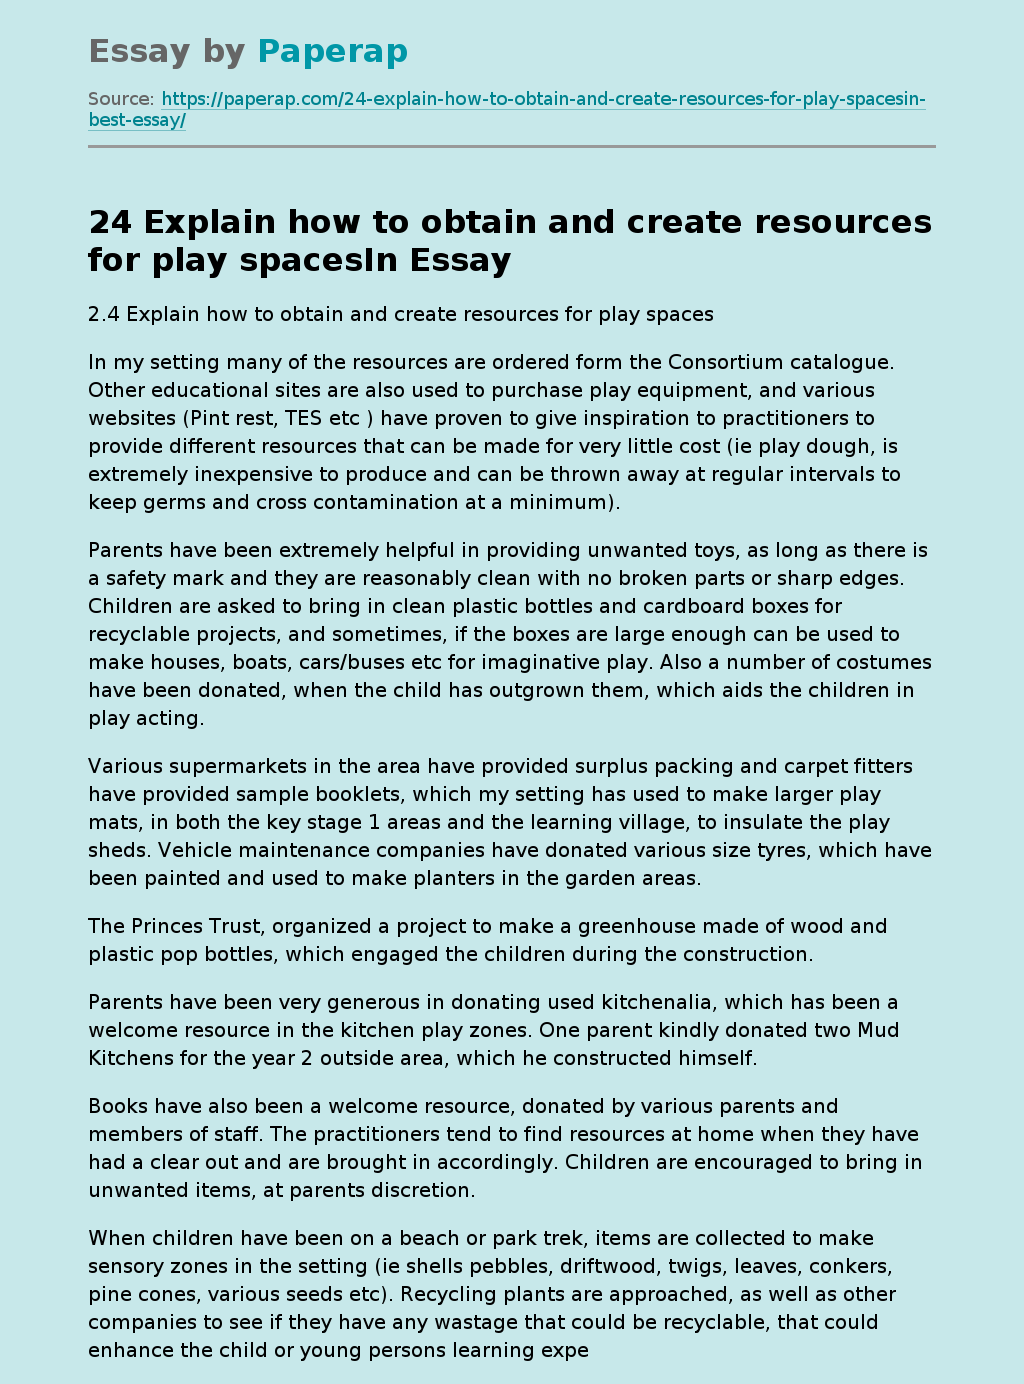 24 Explain how to obtain and create resources for play spacesIn